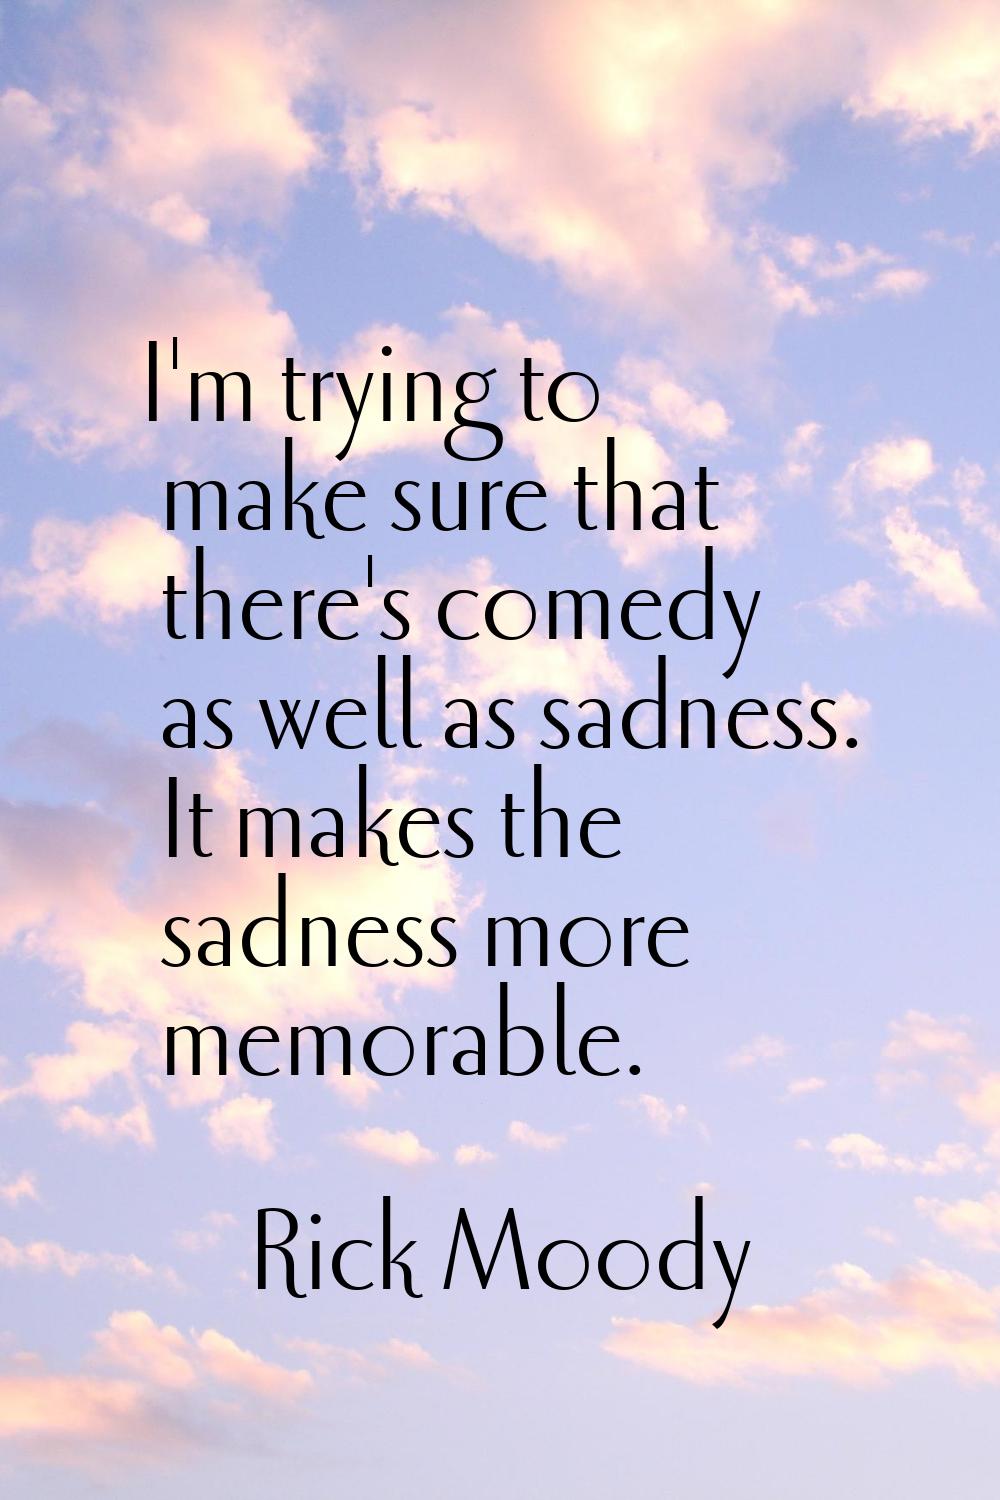 I'm trying to make sure that there's comedy as well as sadness. It makes the sadness more memorable